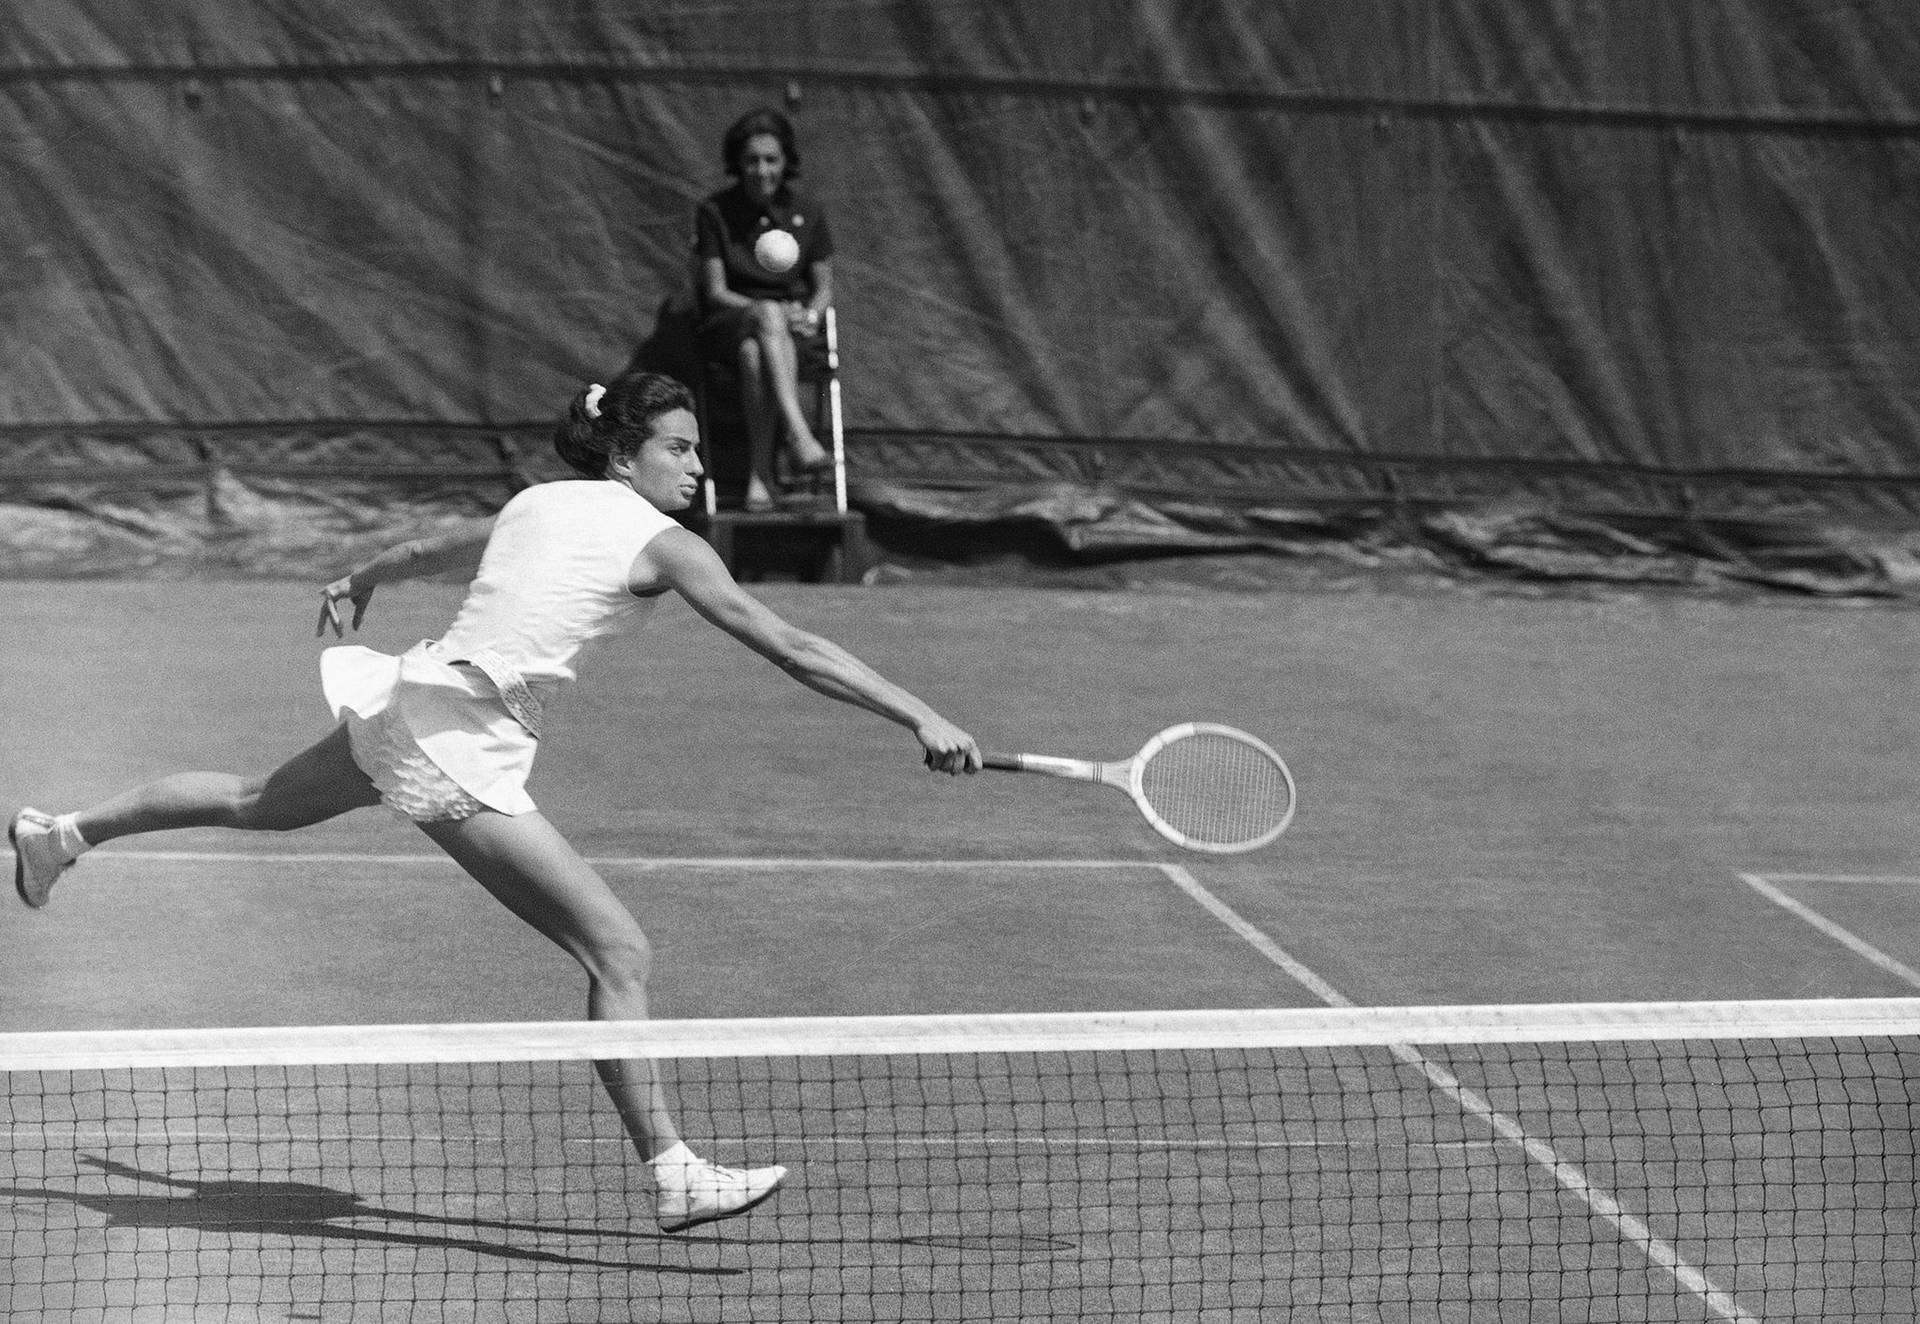 Caption: Virginia Wade in action during a Tennis Match Wallpaper